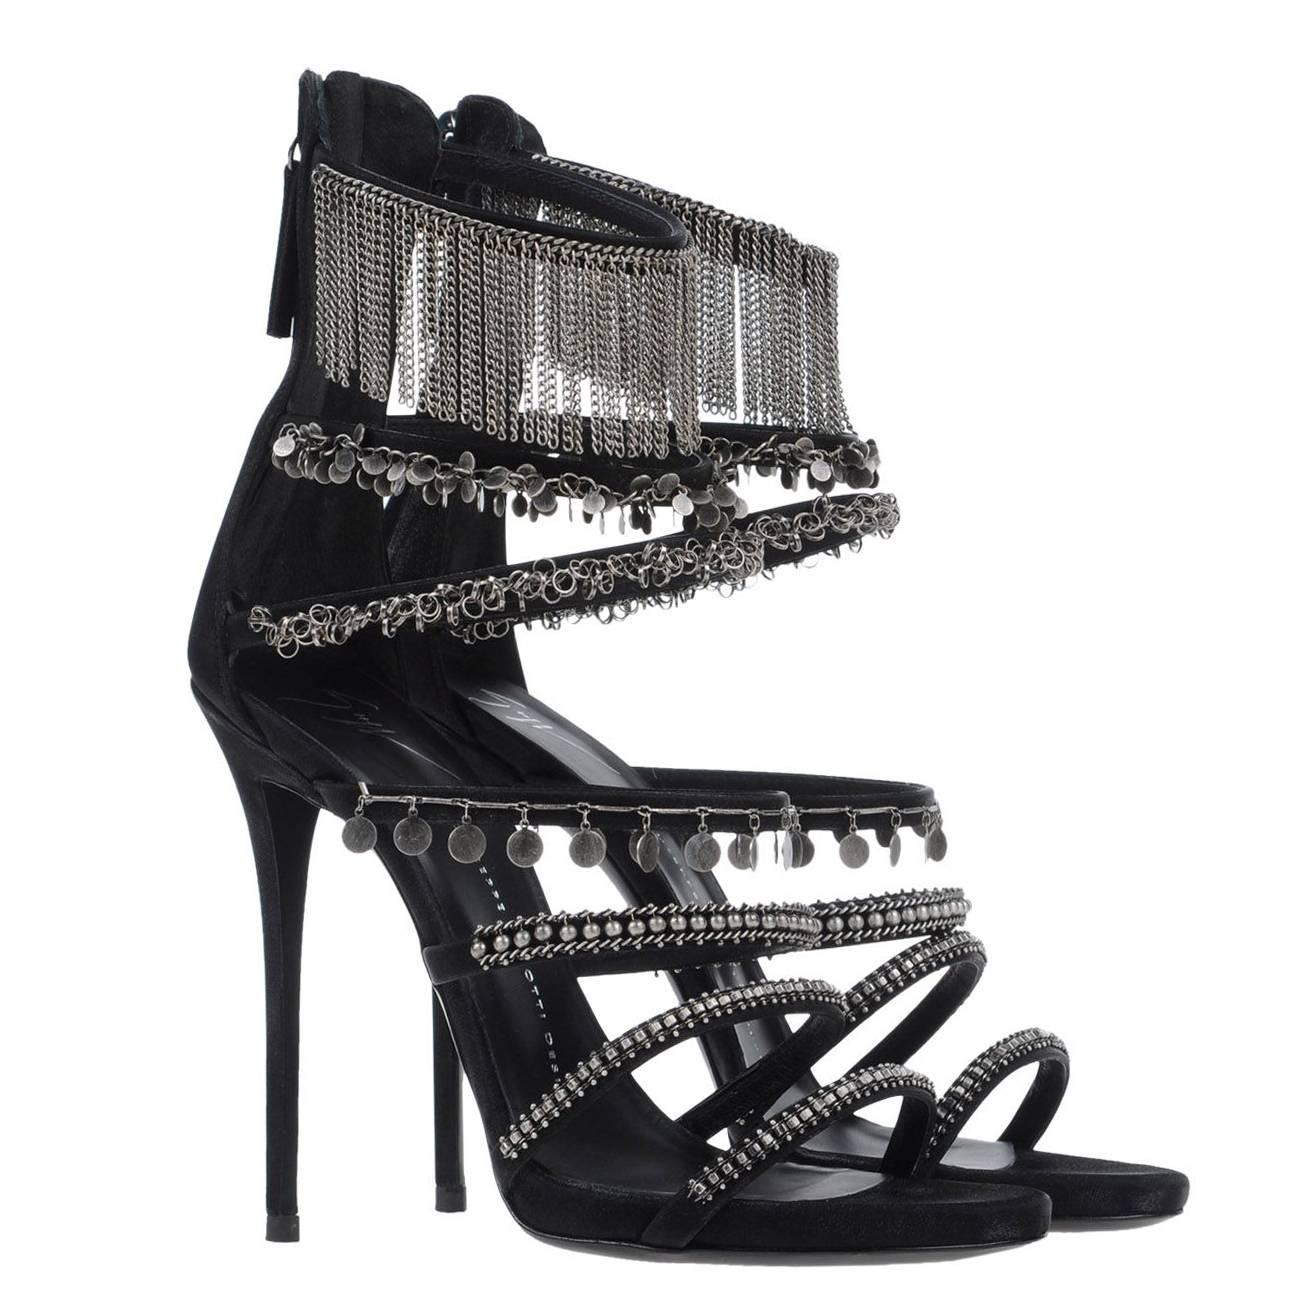 Giuseppe Zanotti NEW & SOLD OUT Black Silver Chain Link High Heels Sandals